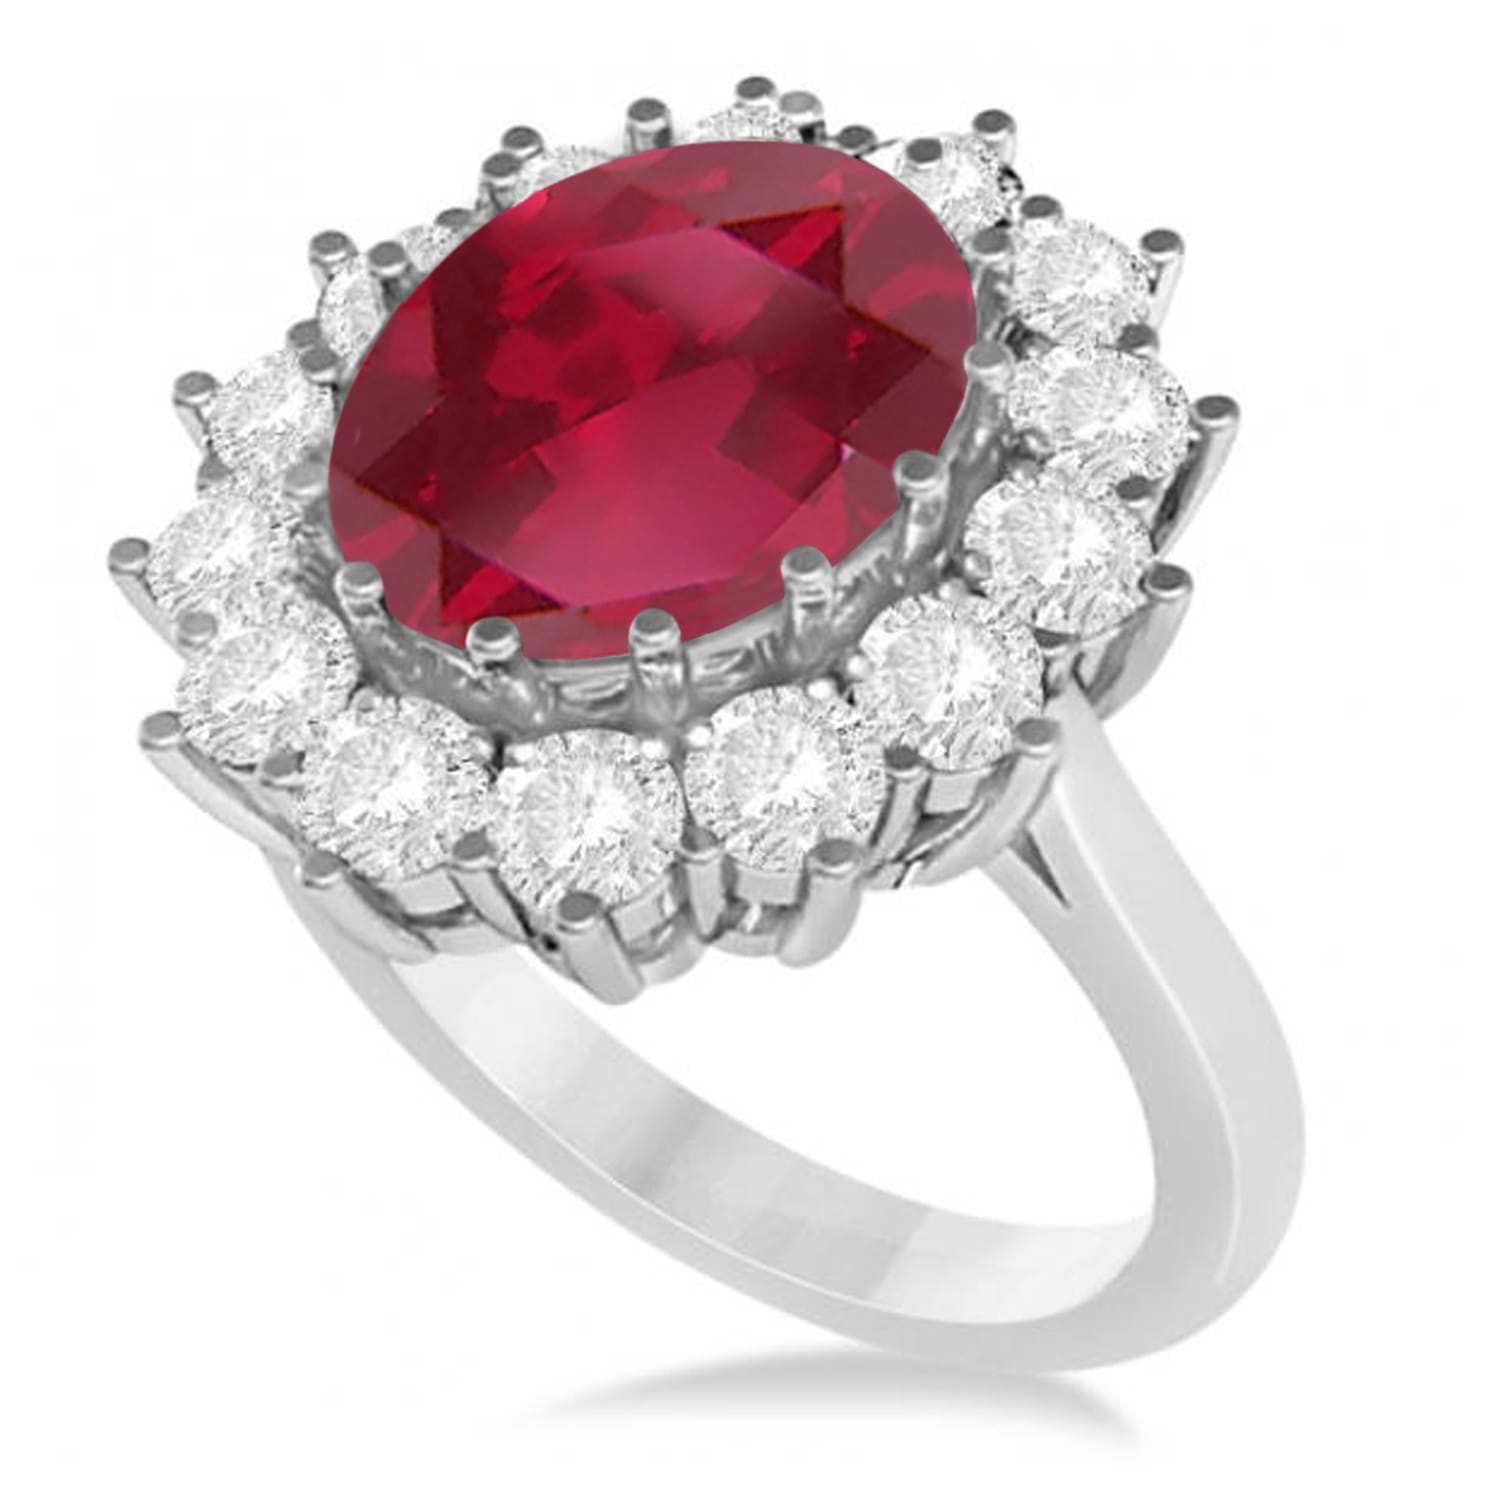 Oval Ruby and Diamond Ring 14k White Gold (5.40ctw)